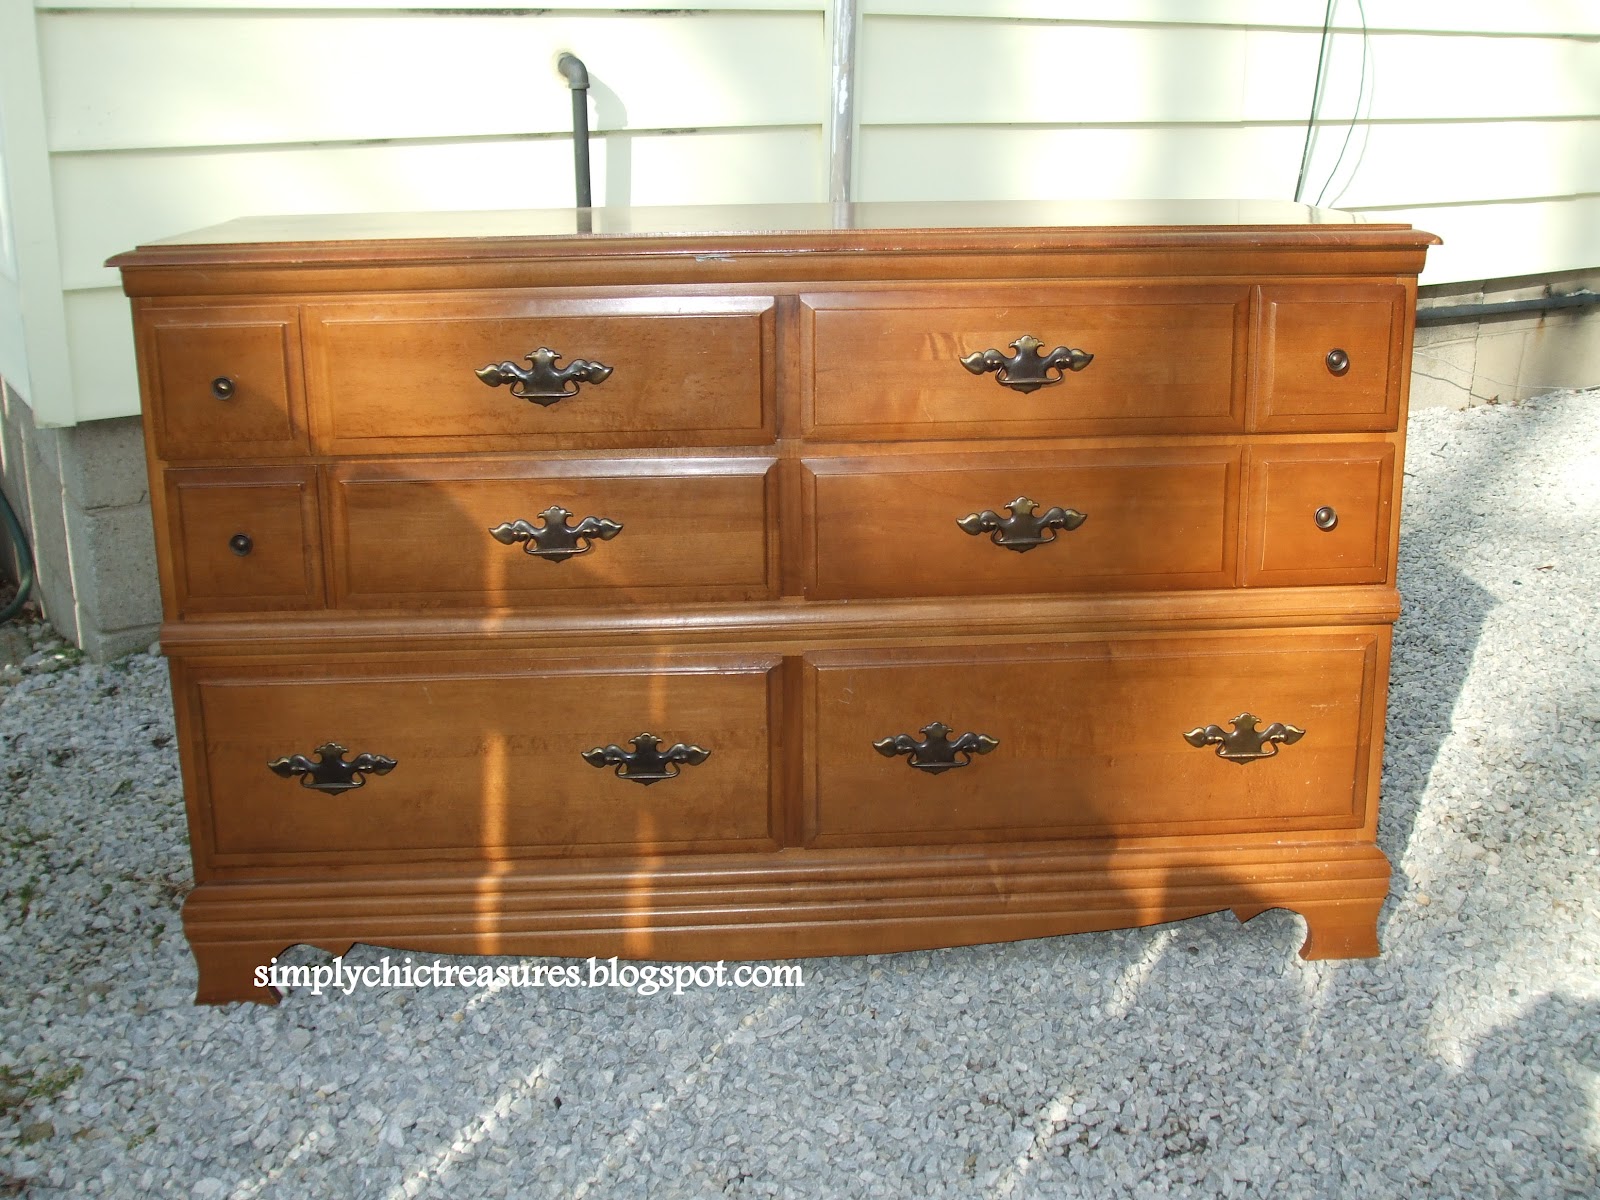 Simply Chic Treasures Maple Dresser Makeover